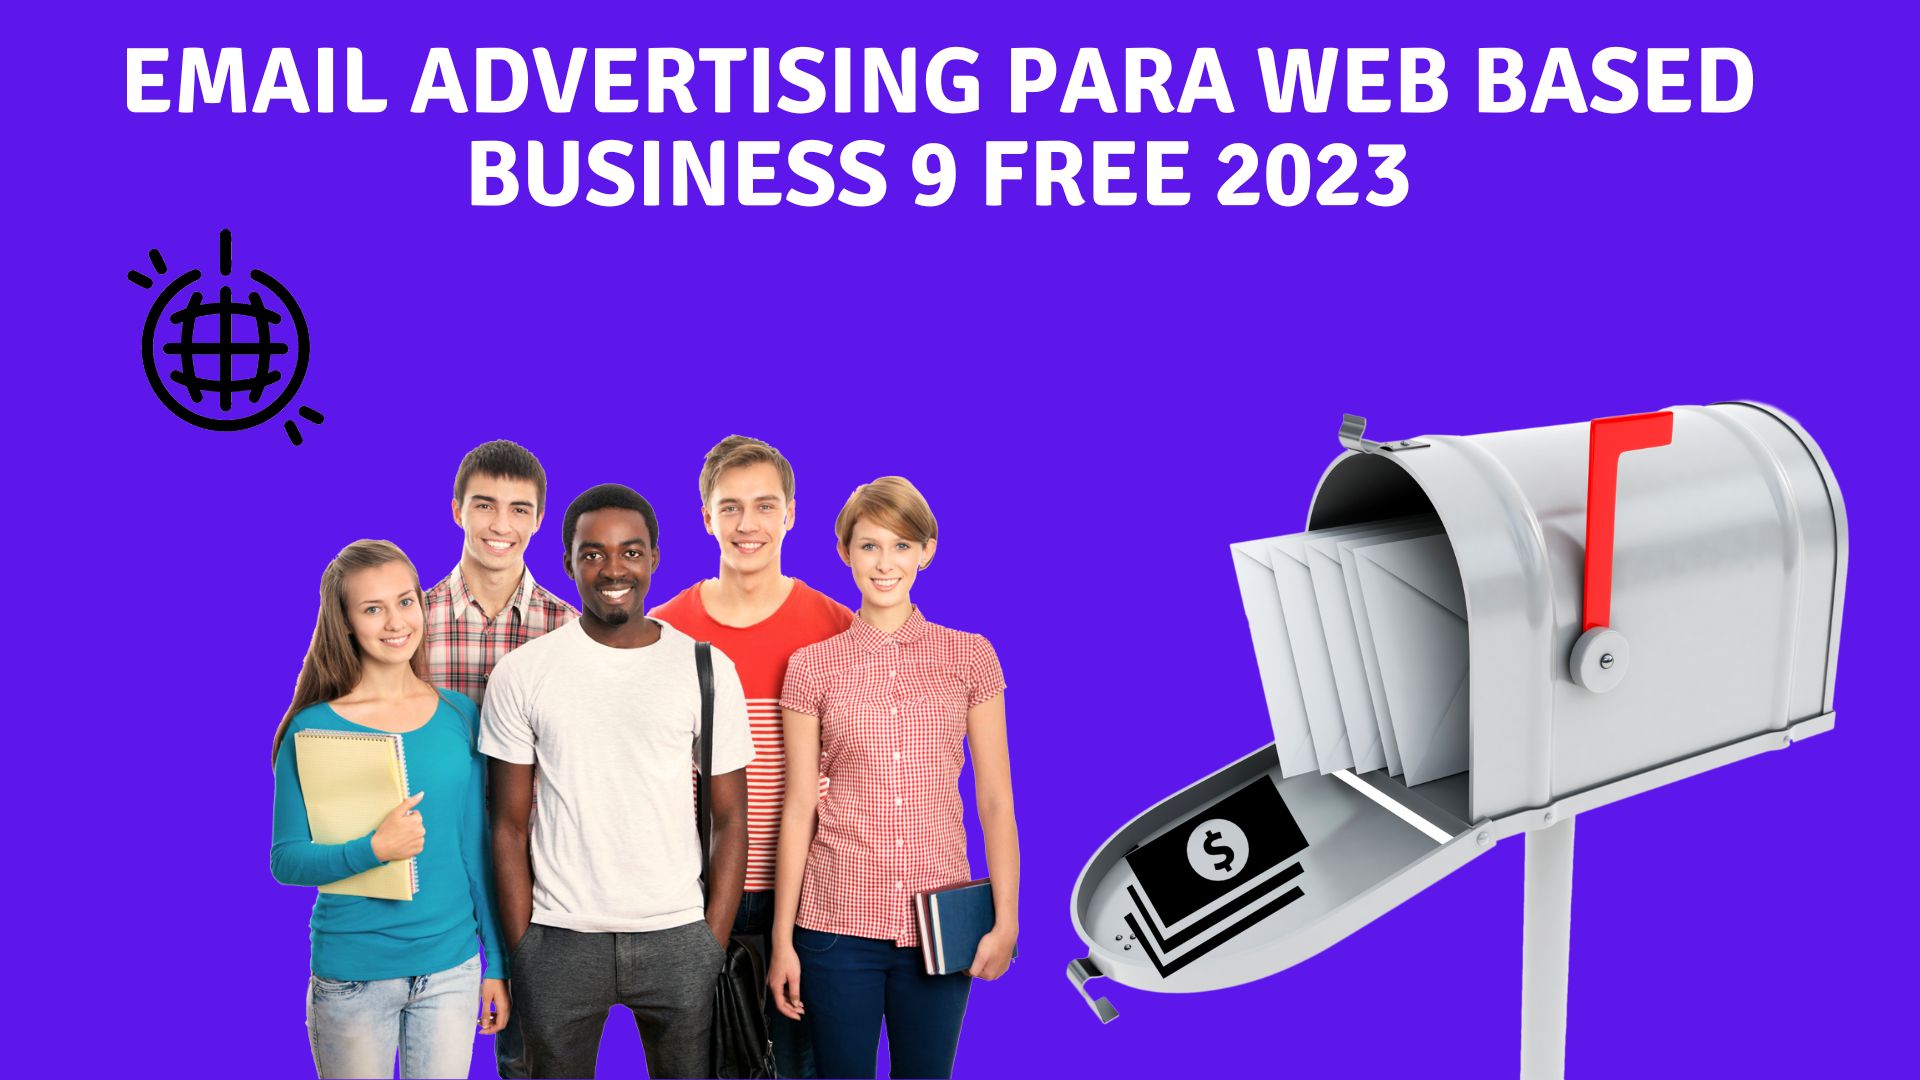 Email advertising para web based business 9 free 2023